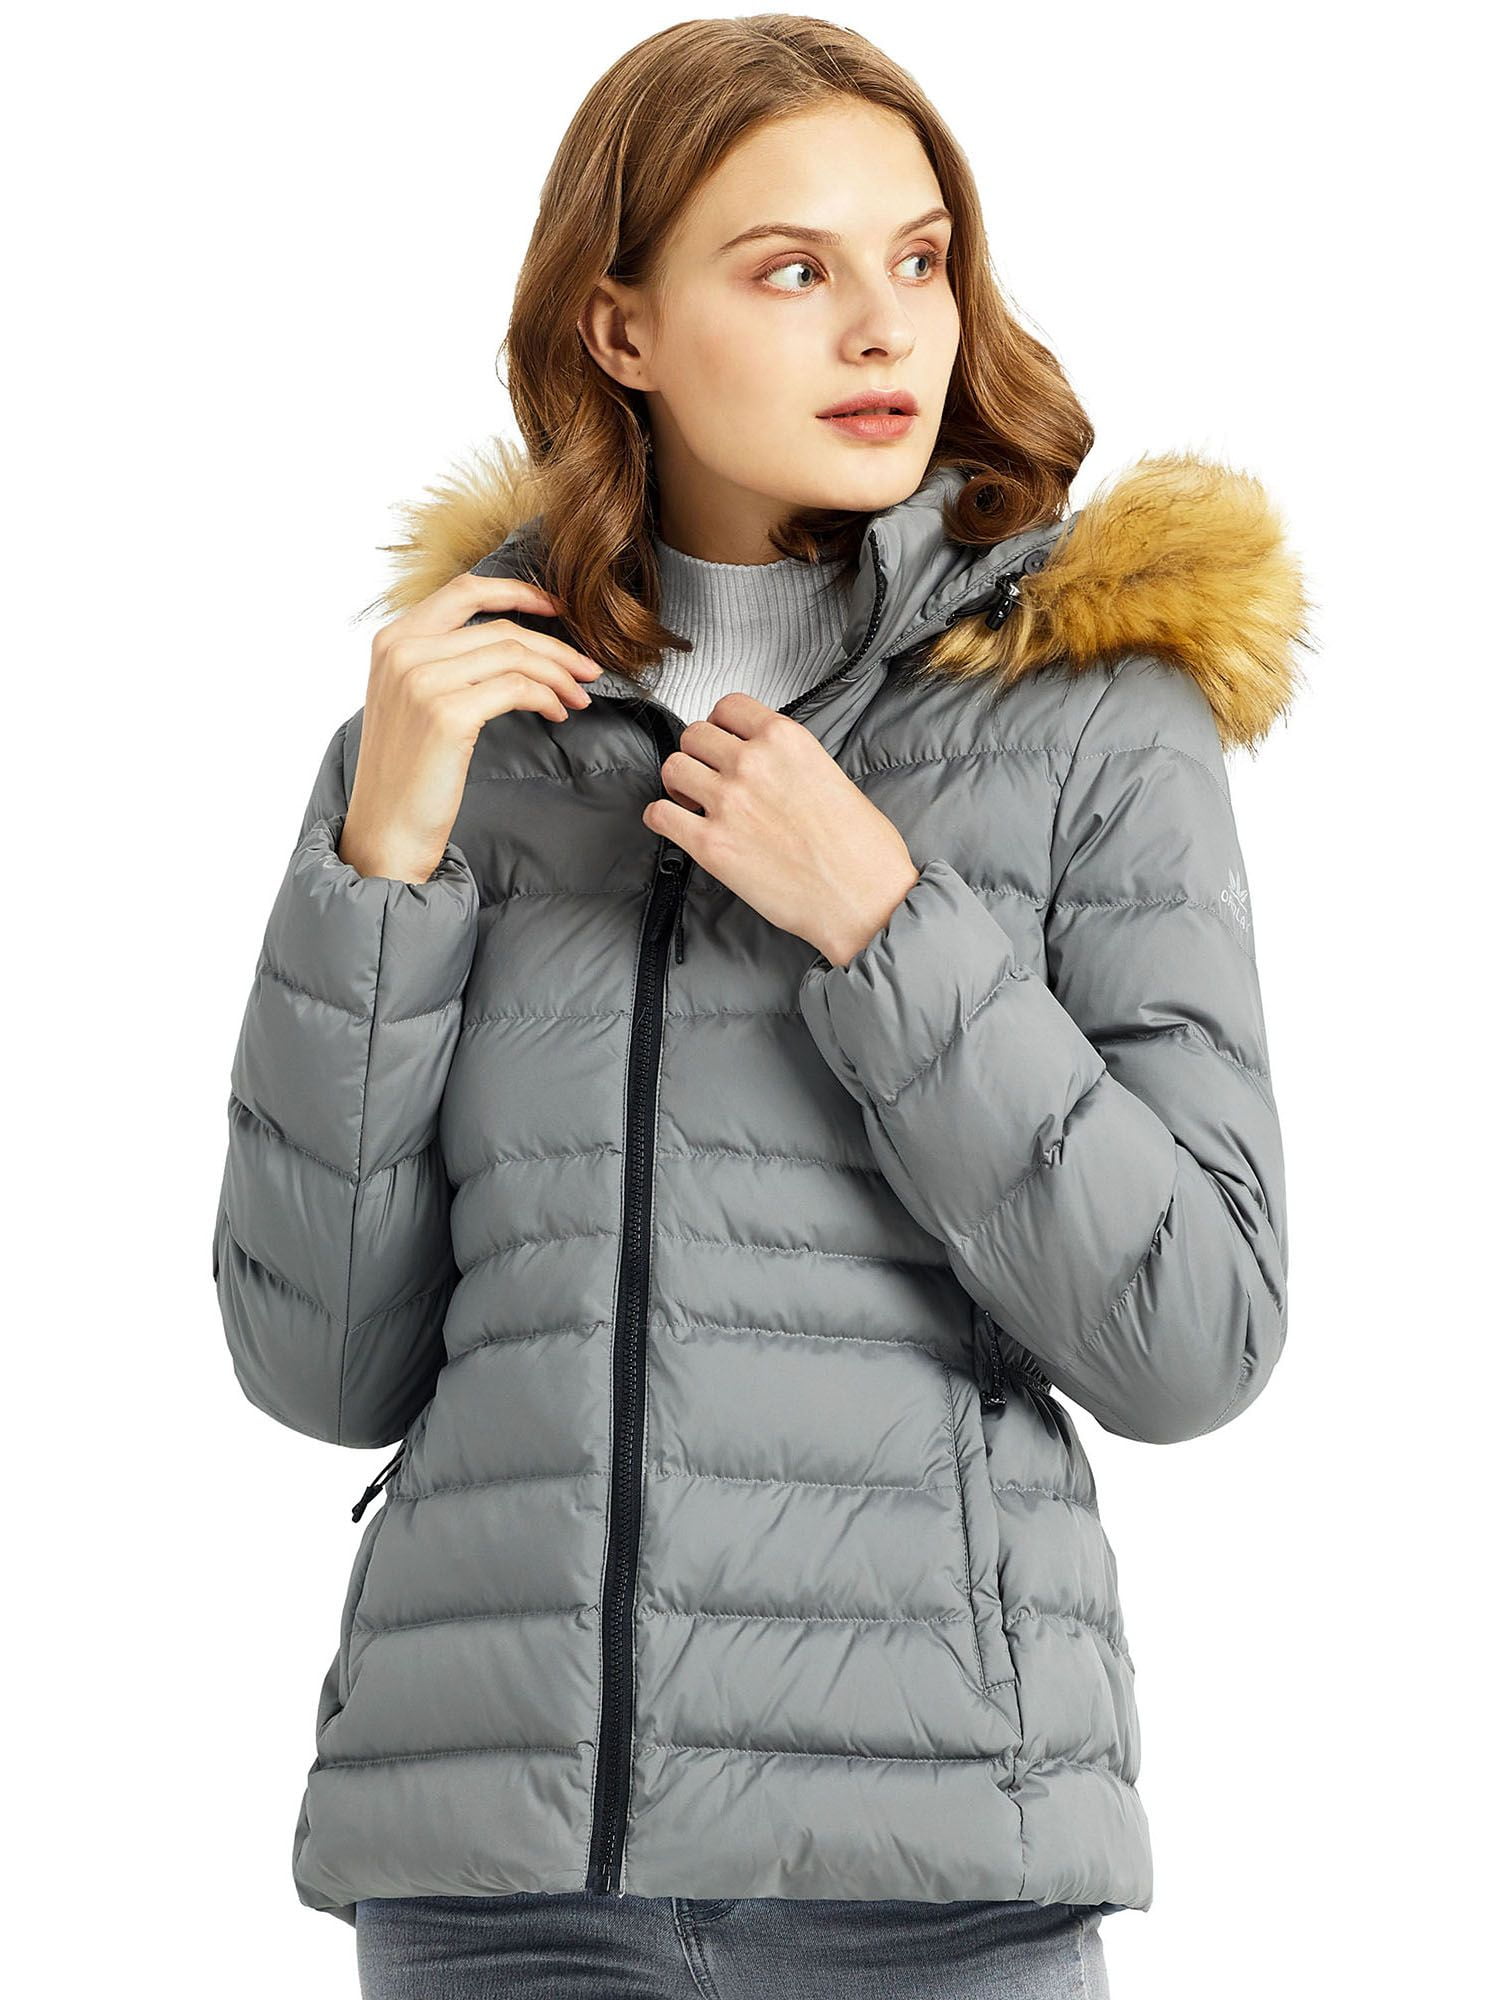 Hurrg Womens Winter Warm Quilted Stand Collar Coats Hooded Down Parka Jacket